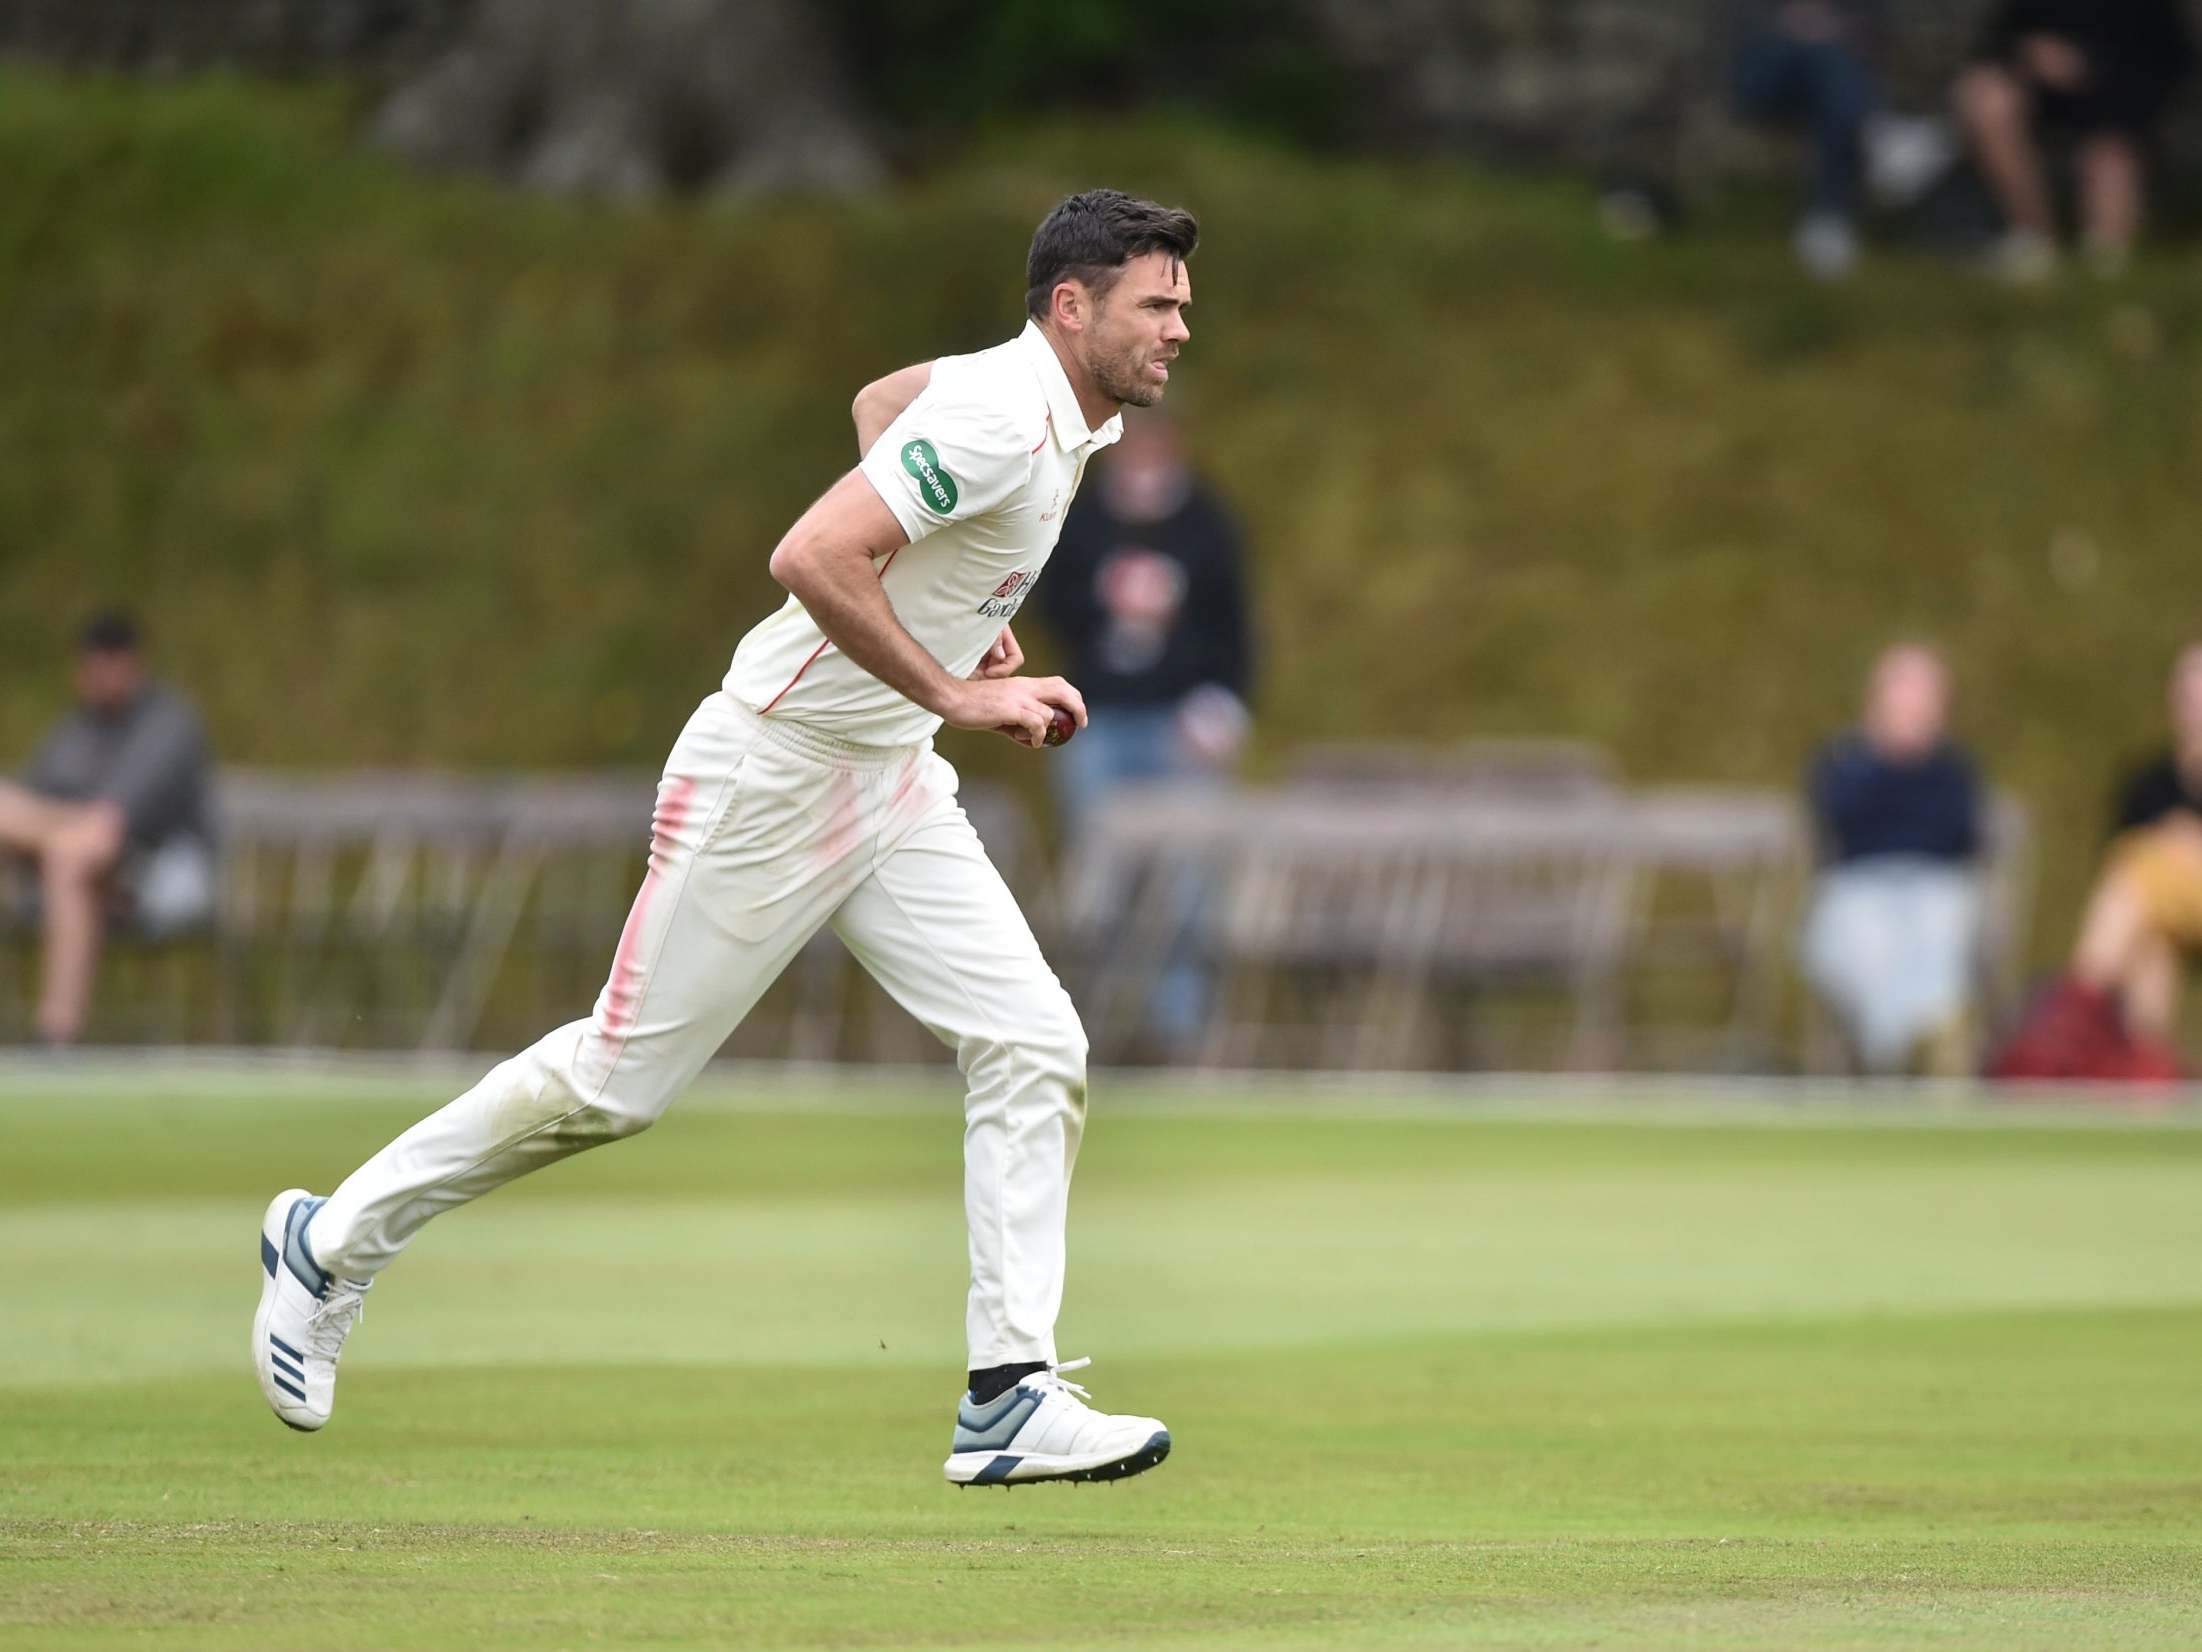 James Anderson runs in to bowl for Lancashire